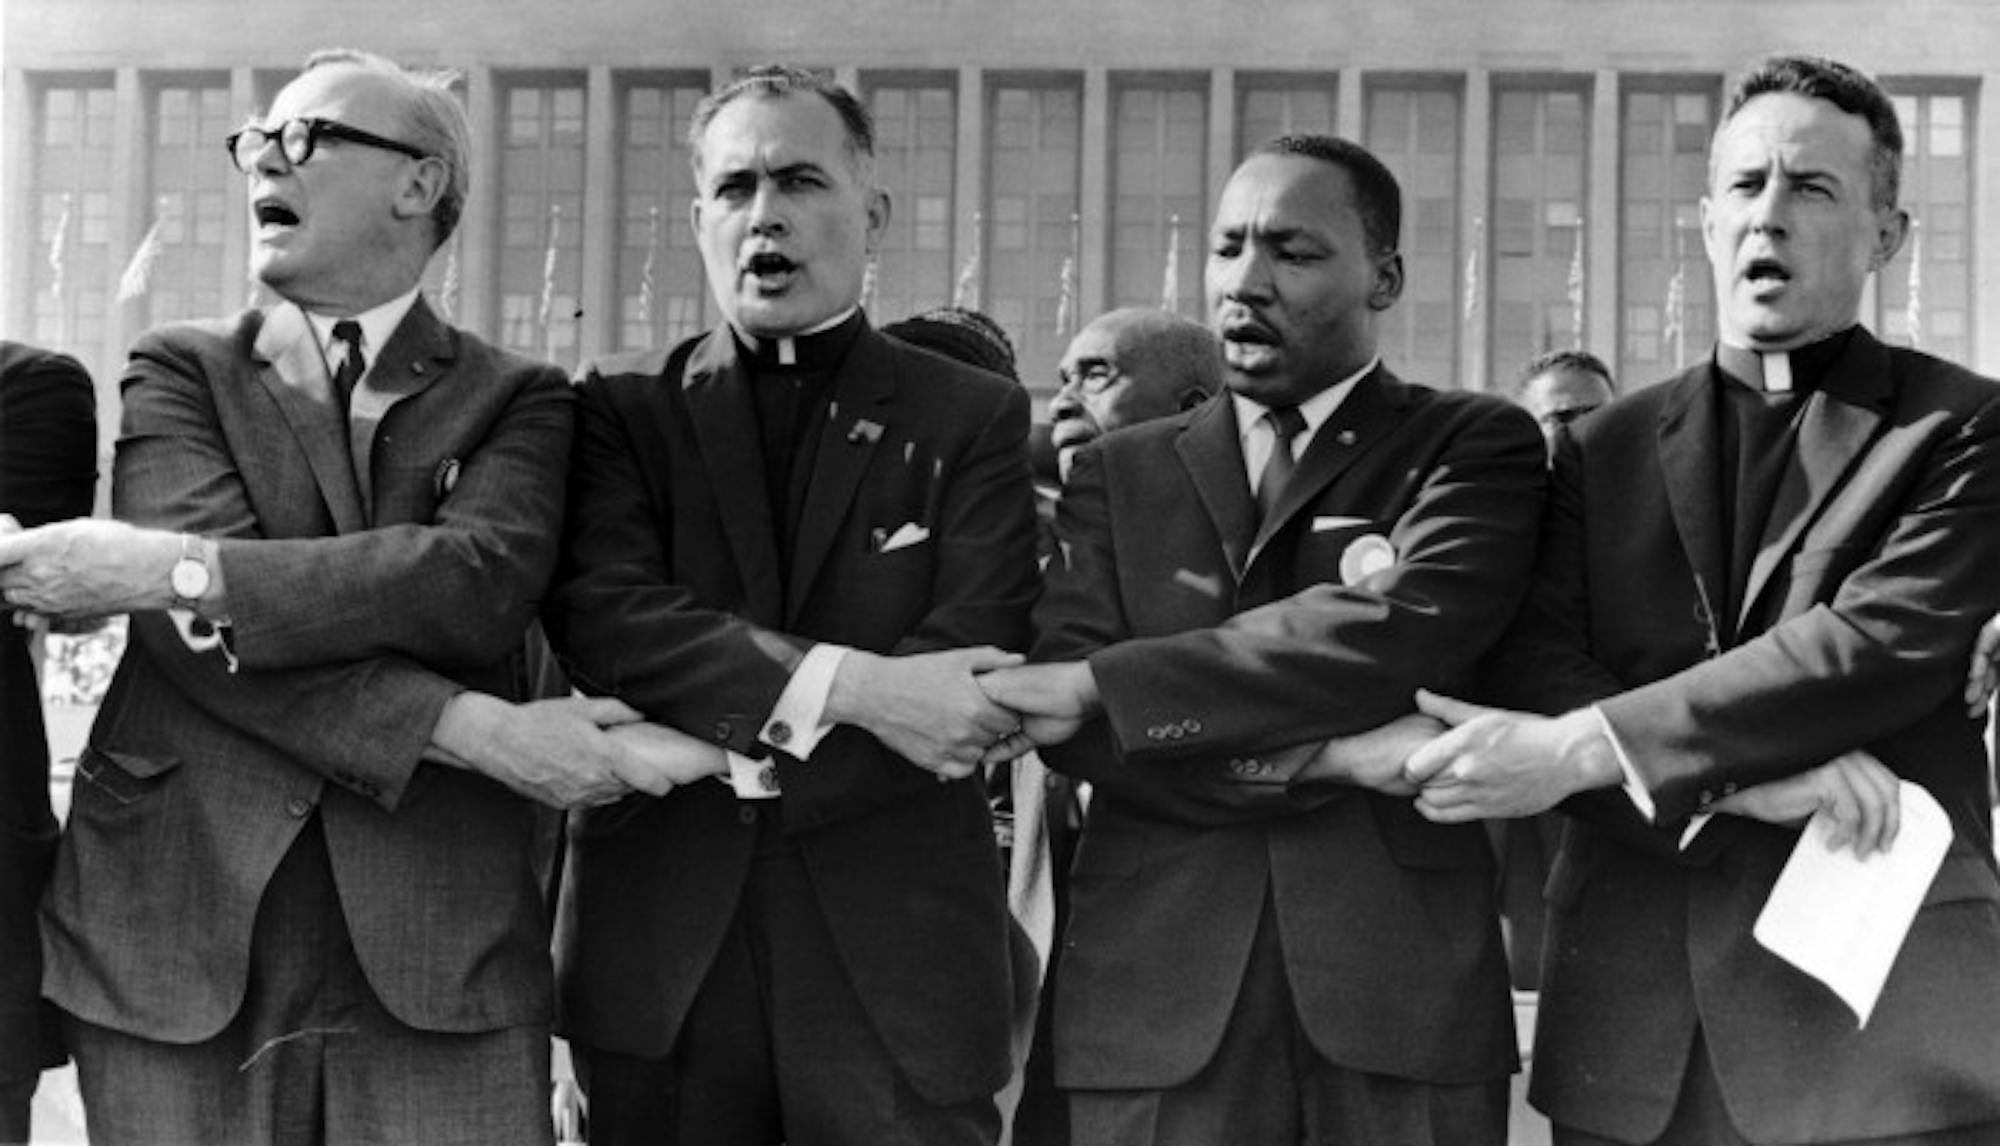 Fr. Hesburgh, second from left, links arms with Dr. Martin Luther King, Jr., to his right, and sings